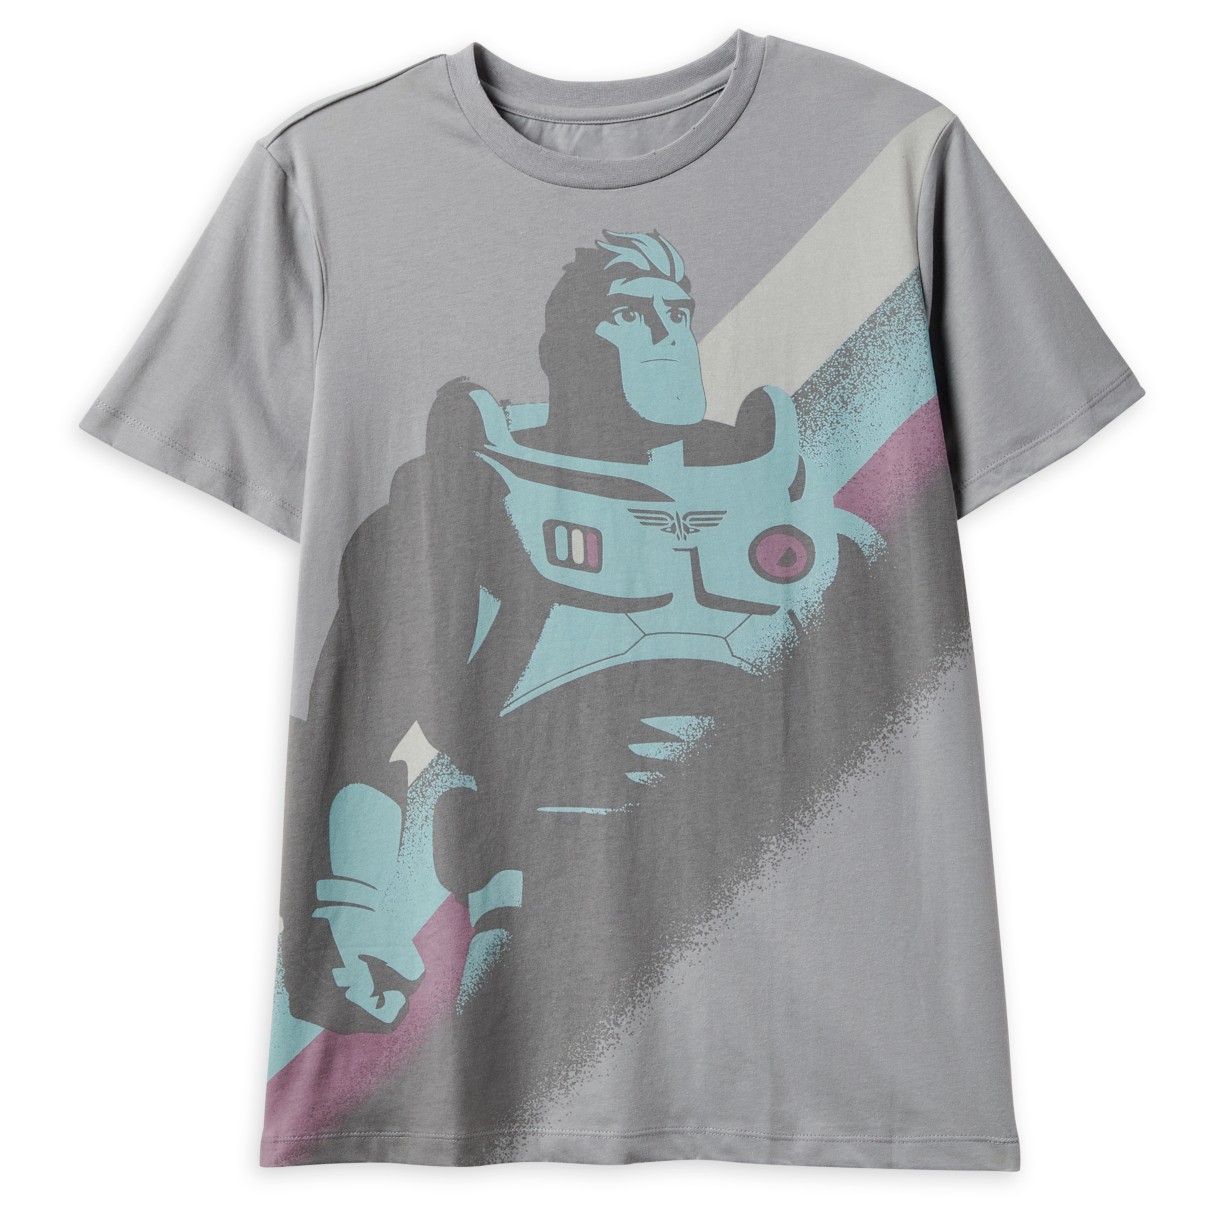 Lightyear T-Shirt for Adults